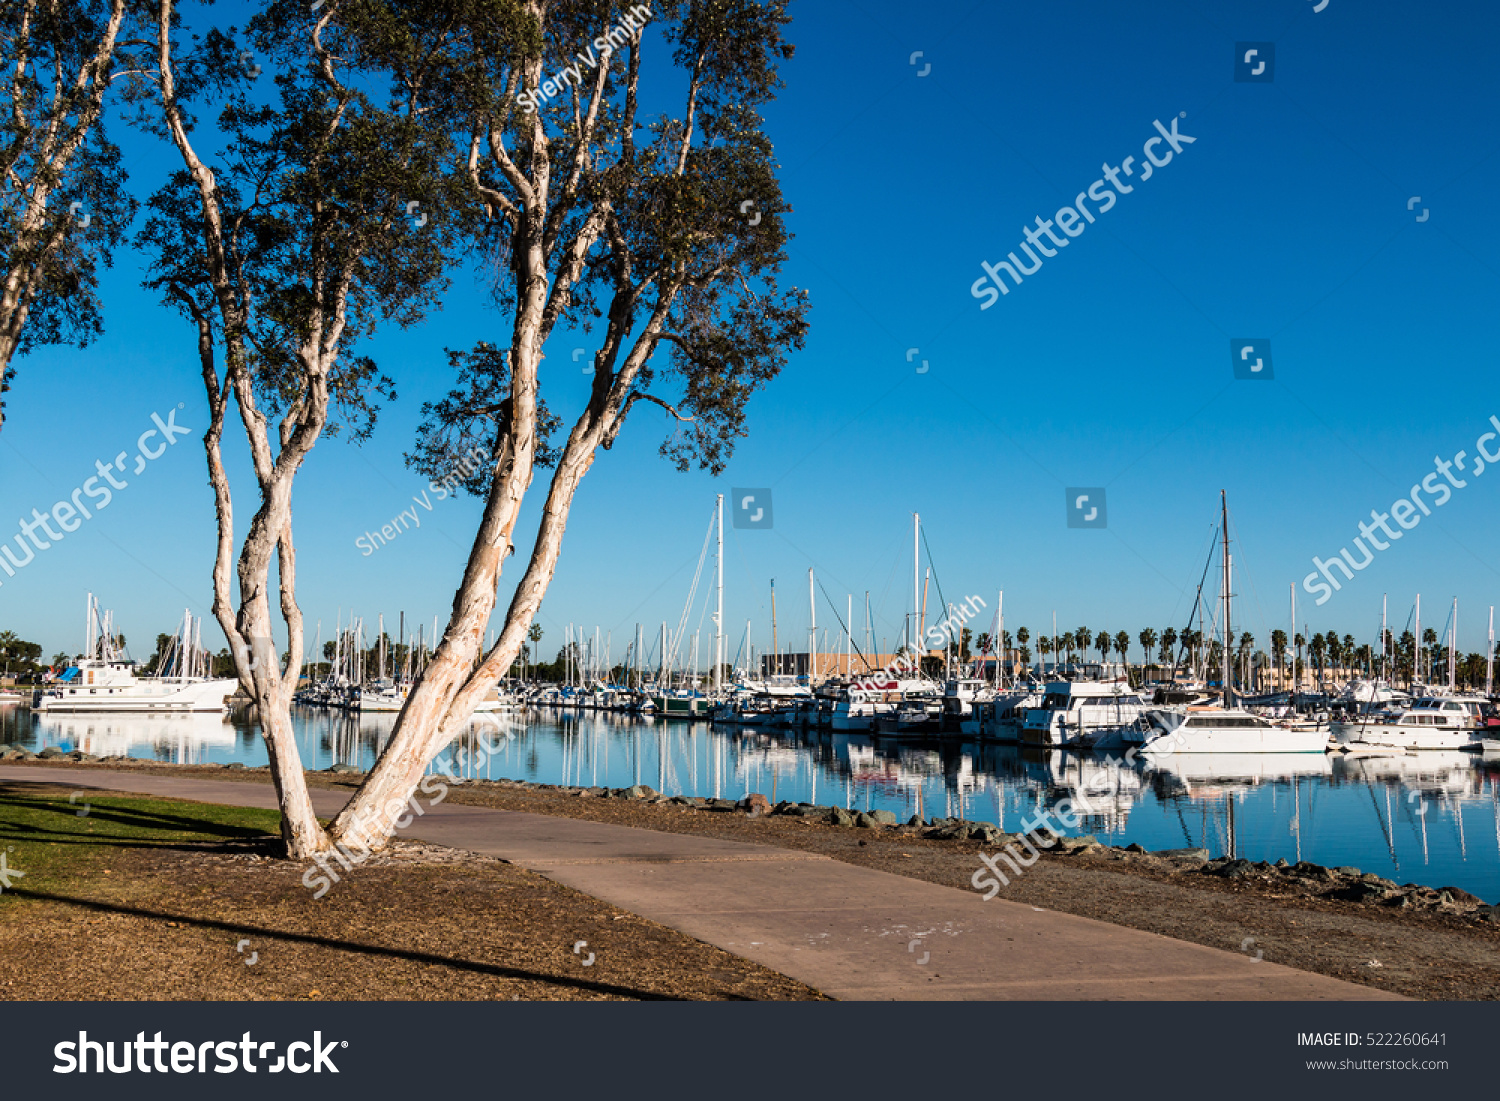 Pathway through the Chula Vista Bayfront park with boats moored in the marina. #522260641